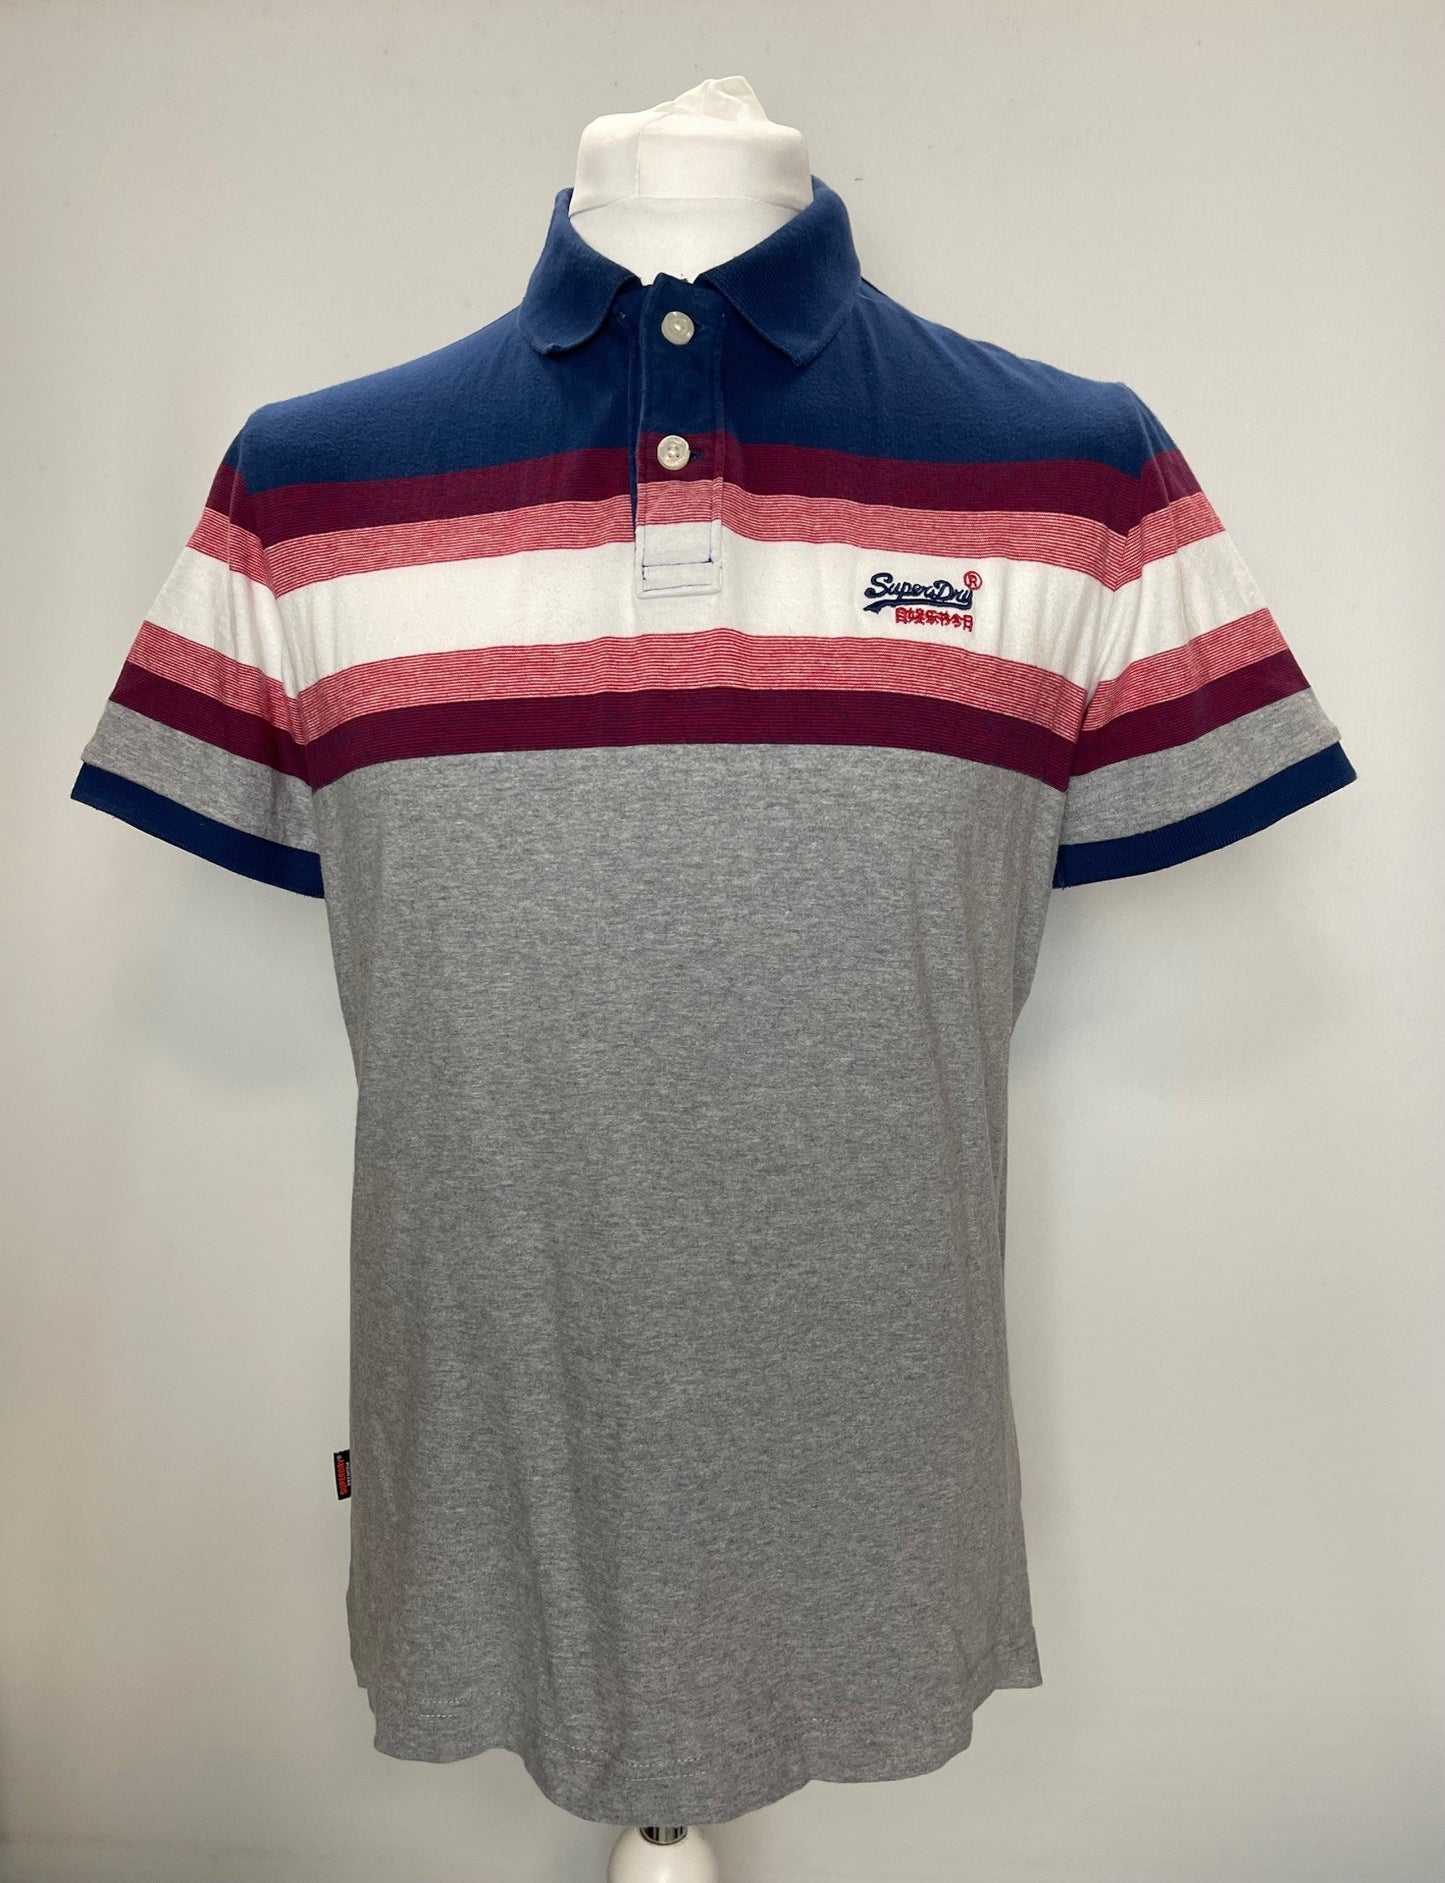 Superdry Grey and Multi Polo Top Large